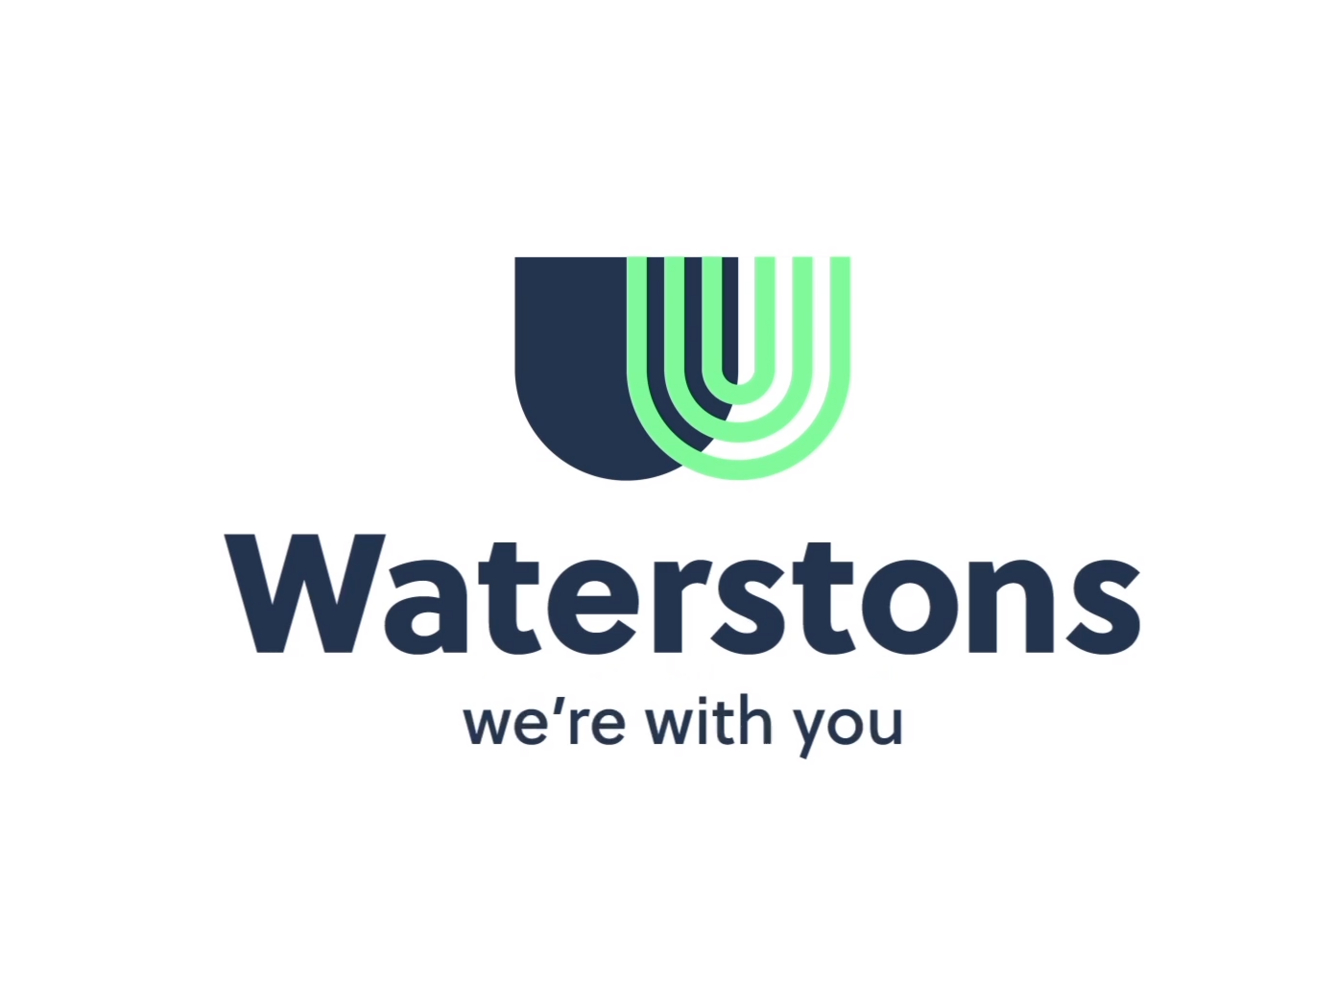 Waterstons